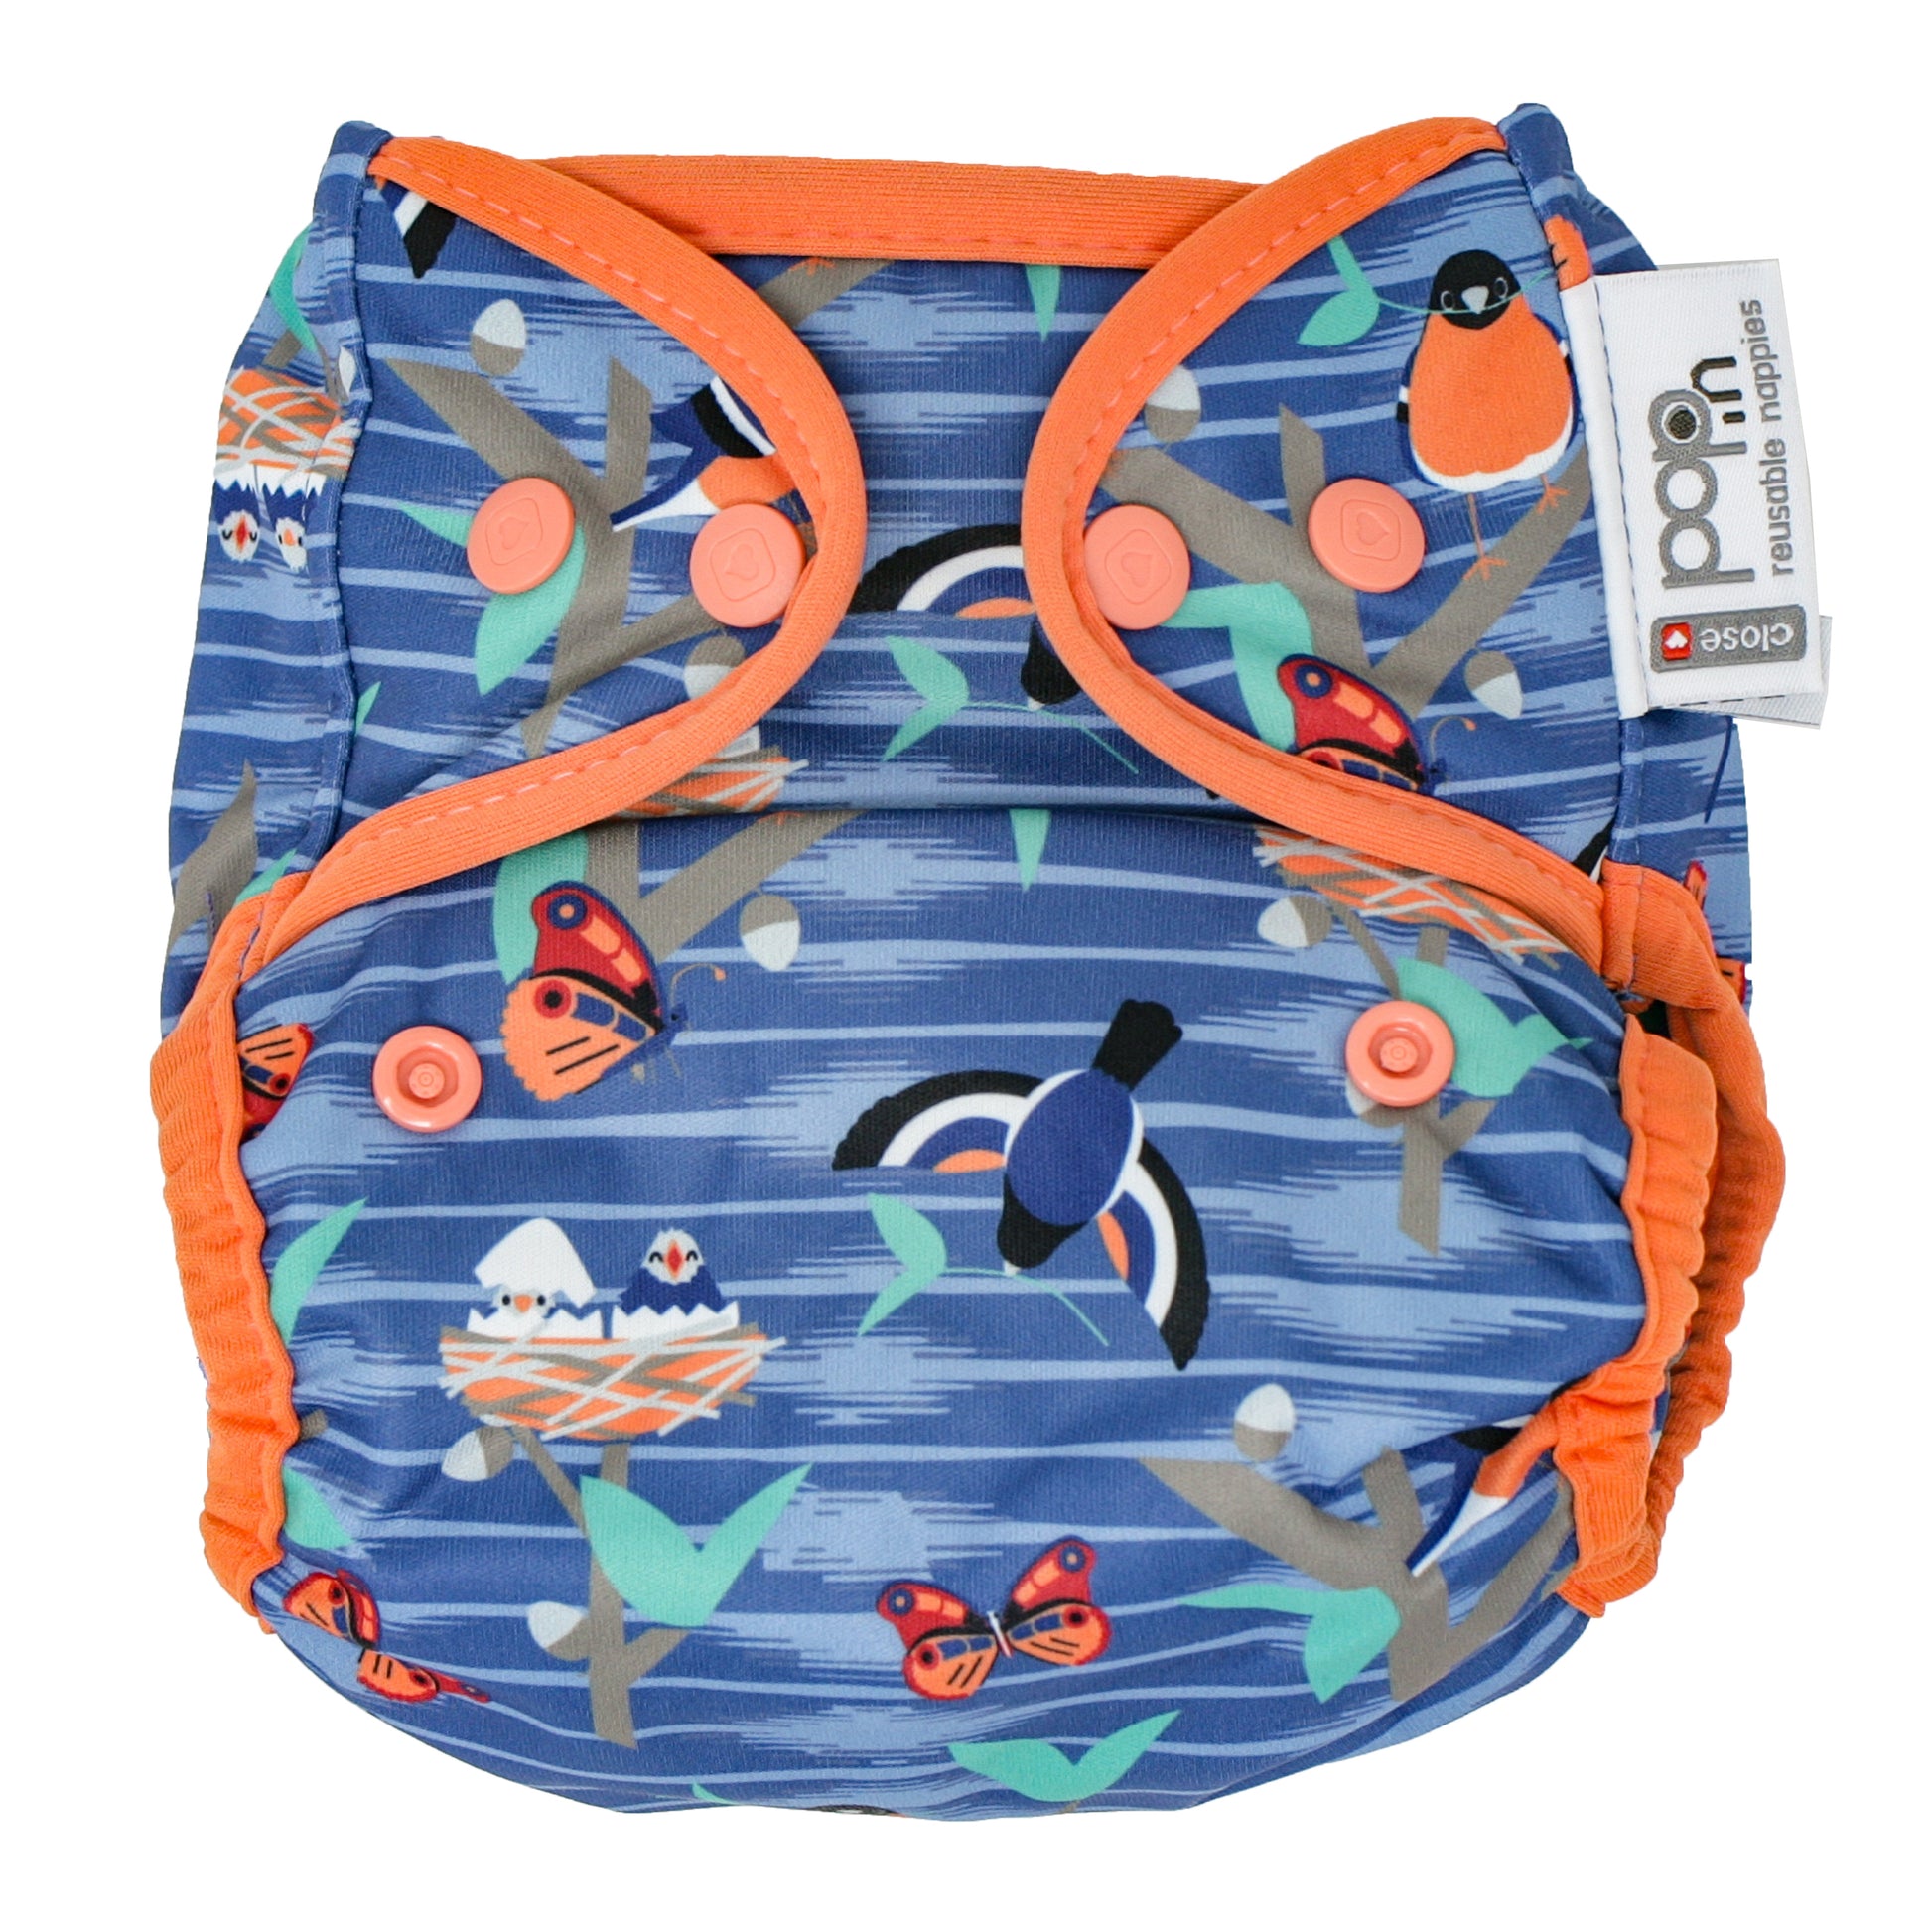 Blue Orange Pop-in One Size Twilight Garden Reusable Cloth Nappy, With Popper Fastening